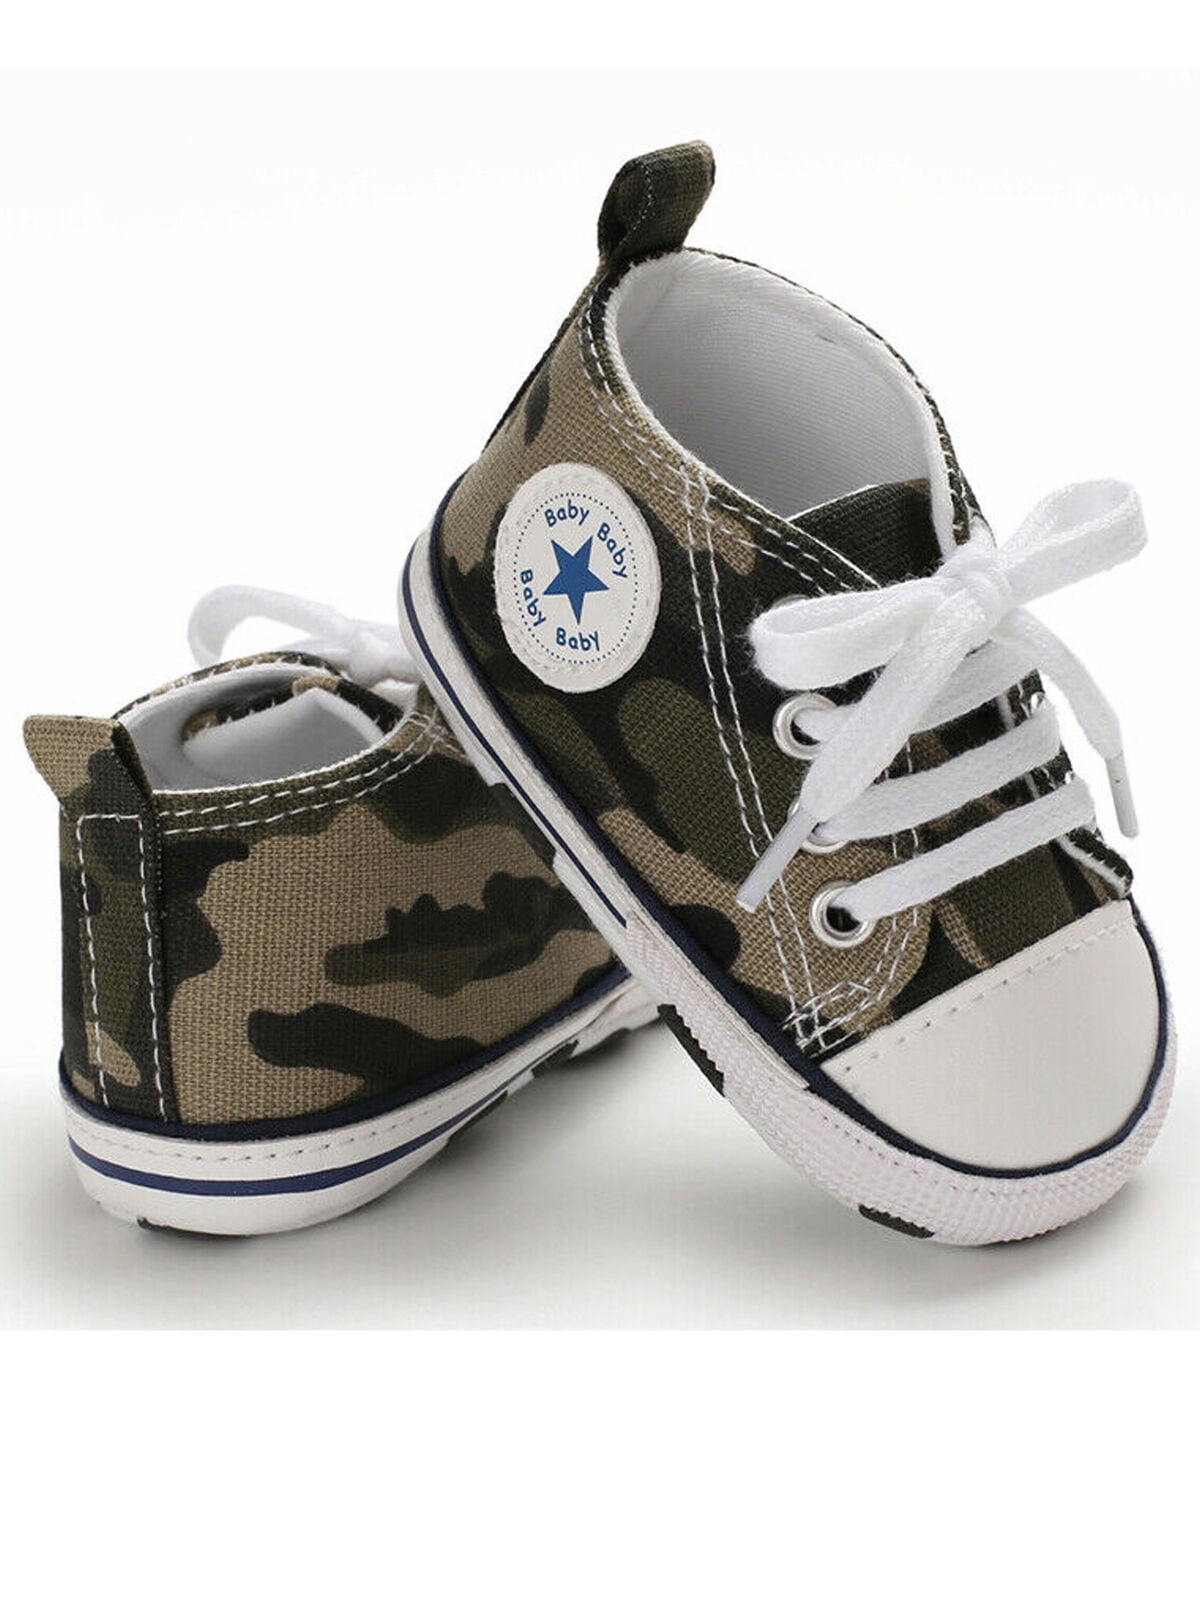 Kids Boys Girls Casual Canvas Shoes Newborn Toddler Baby Soft Crib Sole Sneakers 